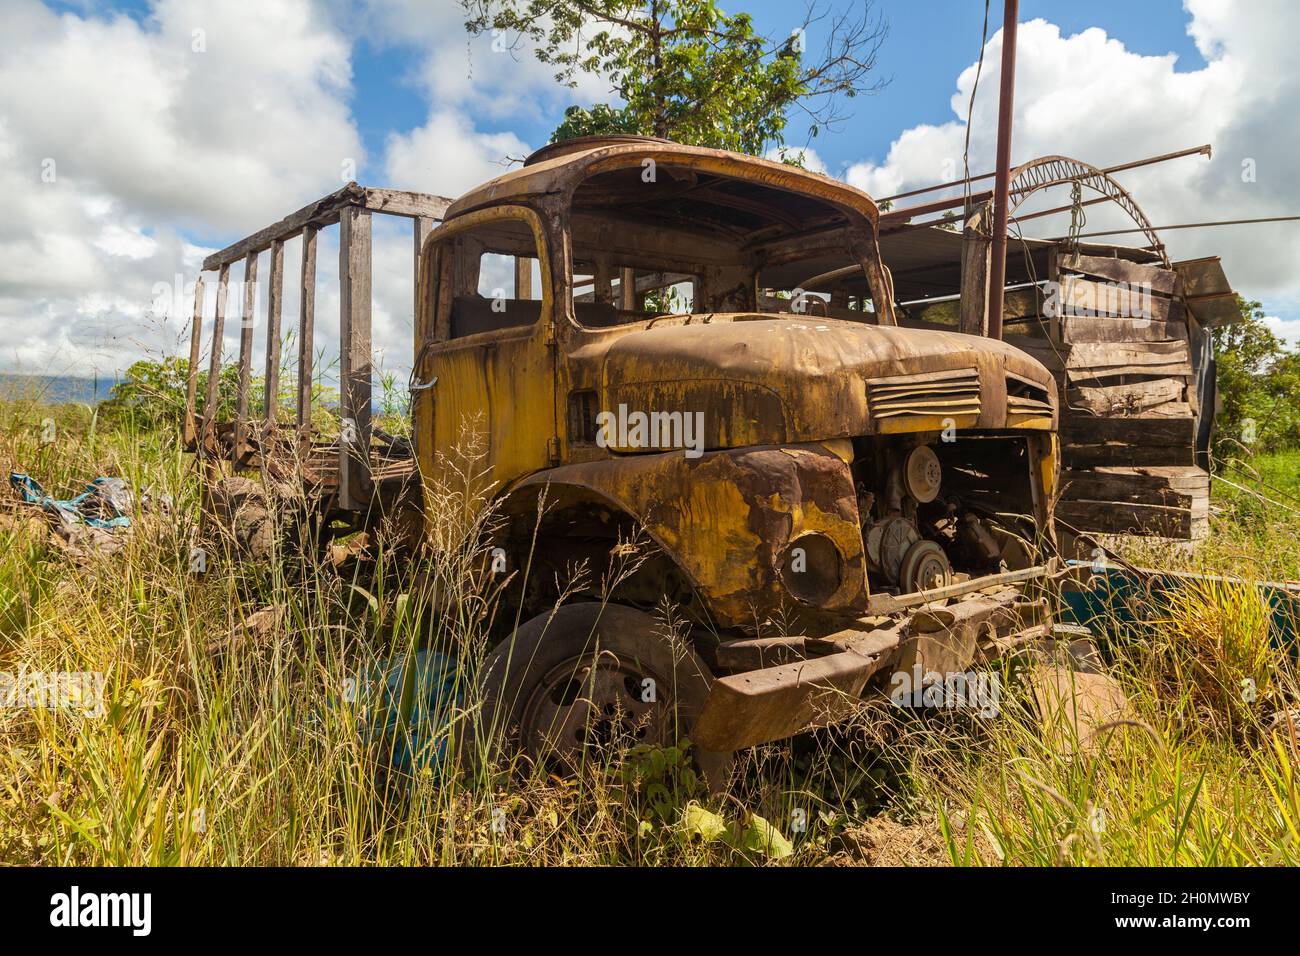 Pilcopata, Peru - April 12, 2014: An old, rusty and abandoned yellow truck, engulfed by weeds, rests in the surroundings of Pilcopata Stock Photo